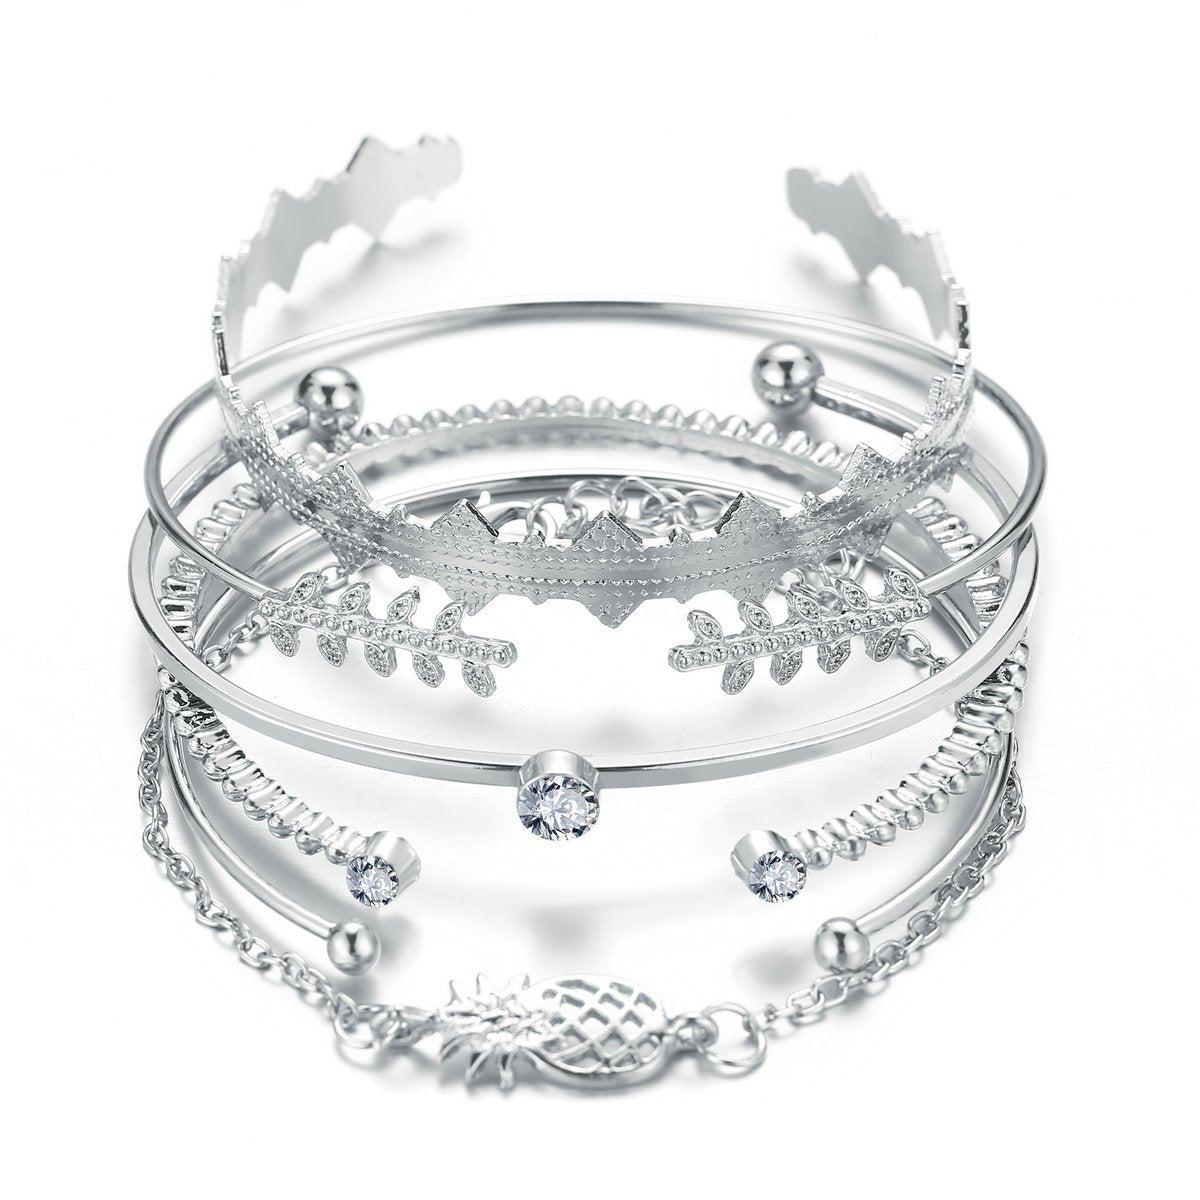 6 Piece Geometric Bangle Set With Austrian  Crystals 18K White Gold Plated Bracelet ITALY Made